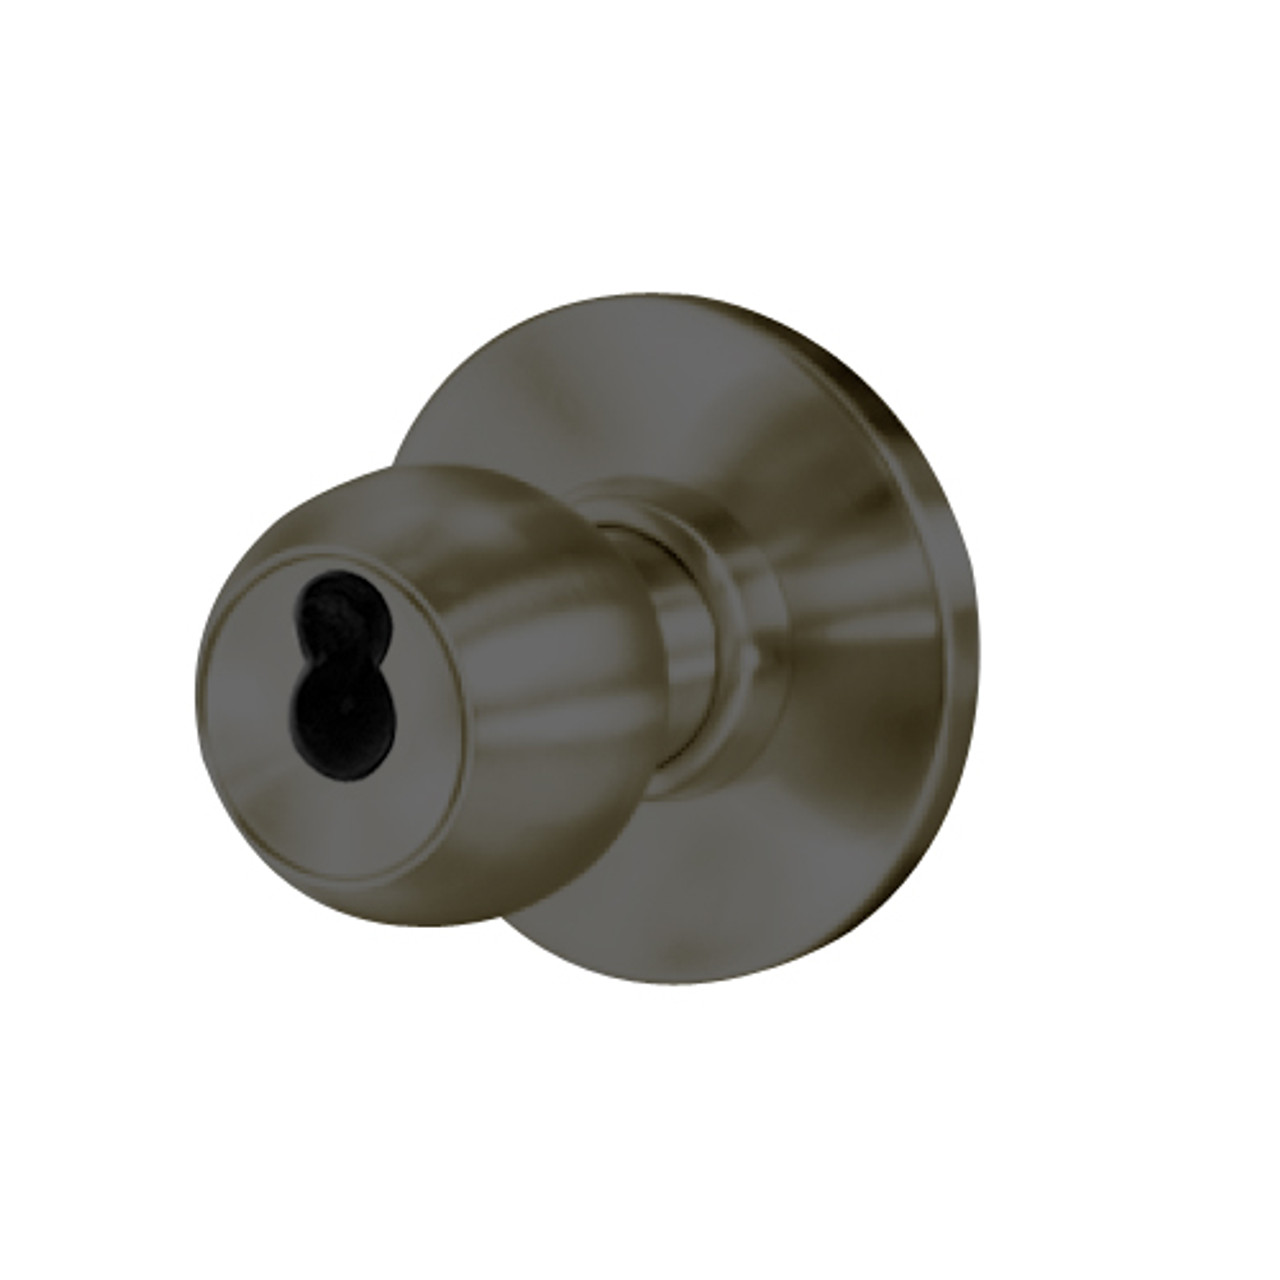 8K37YR4AS3613 Best 8K Series Exit Heavy Duty Cylindrical Knob Locks with Round Style in Oil Rubbed Bronze